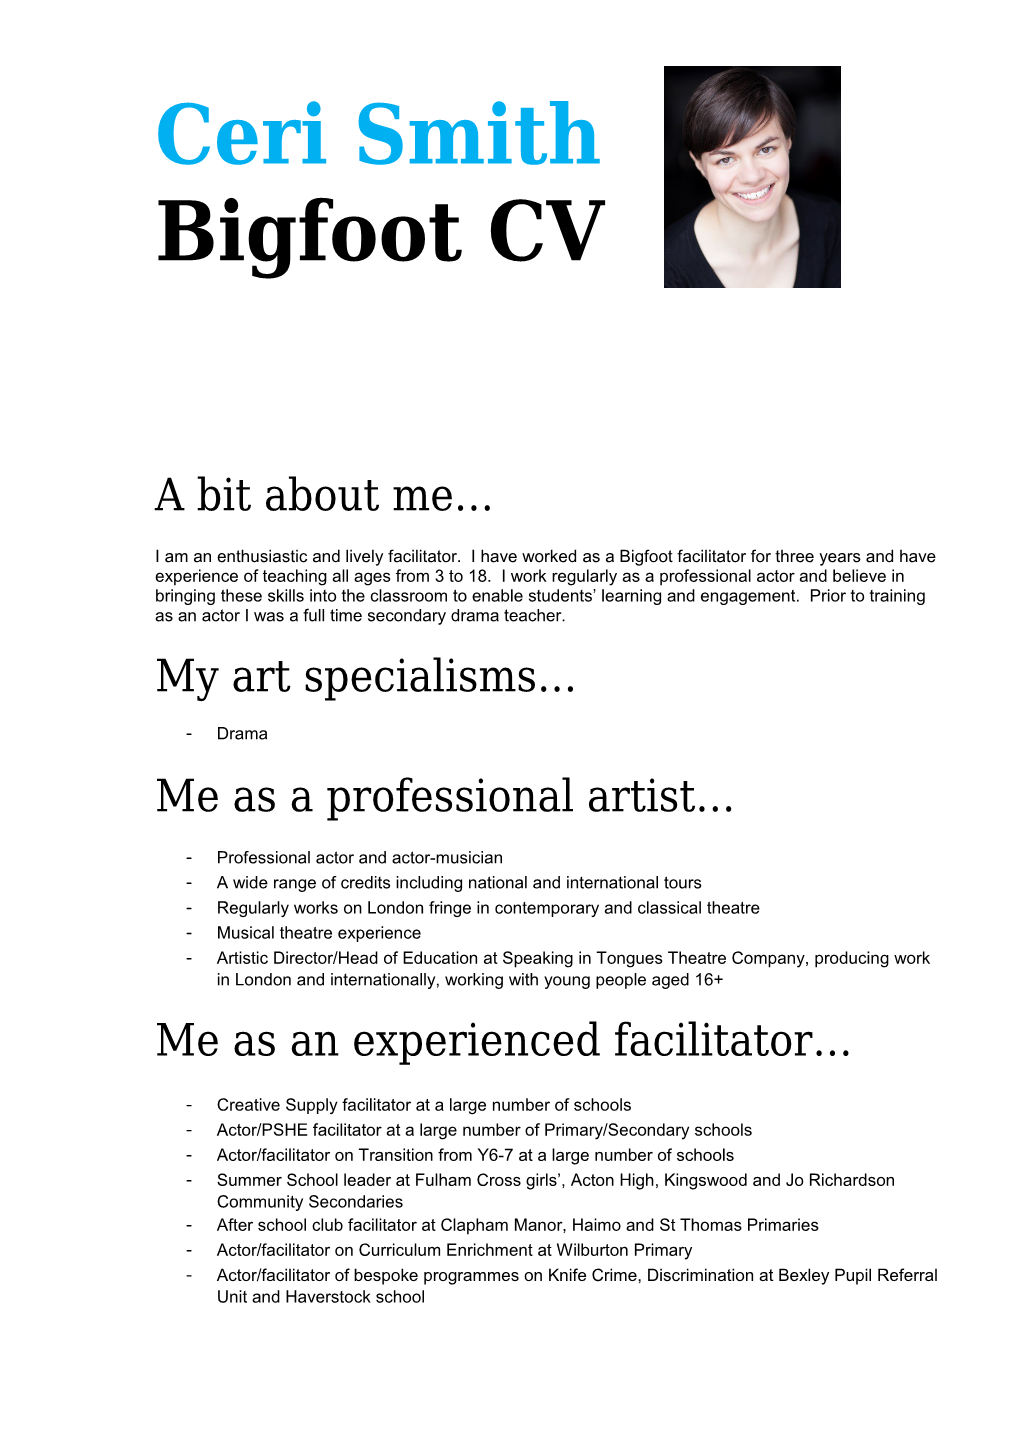 I Am an Enthusiastic and Lively Facilitator. I Have Worked As a Bigfoot Facilitator For